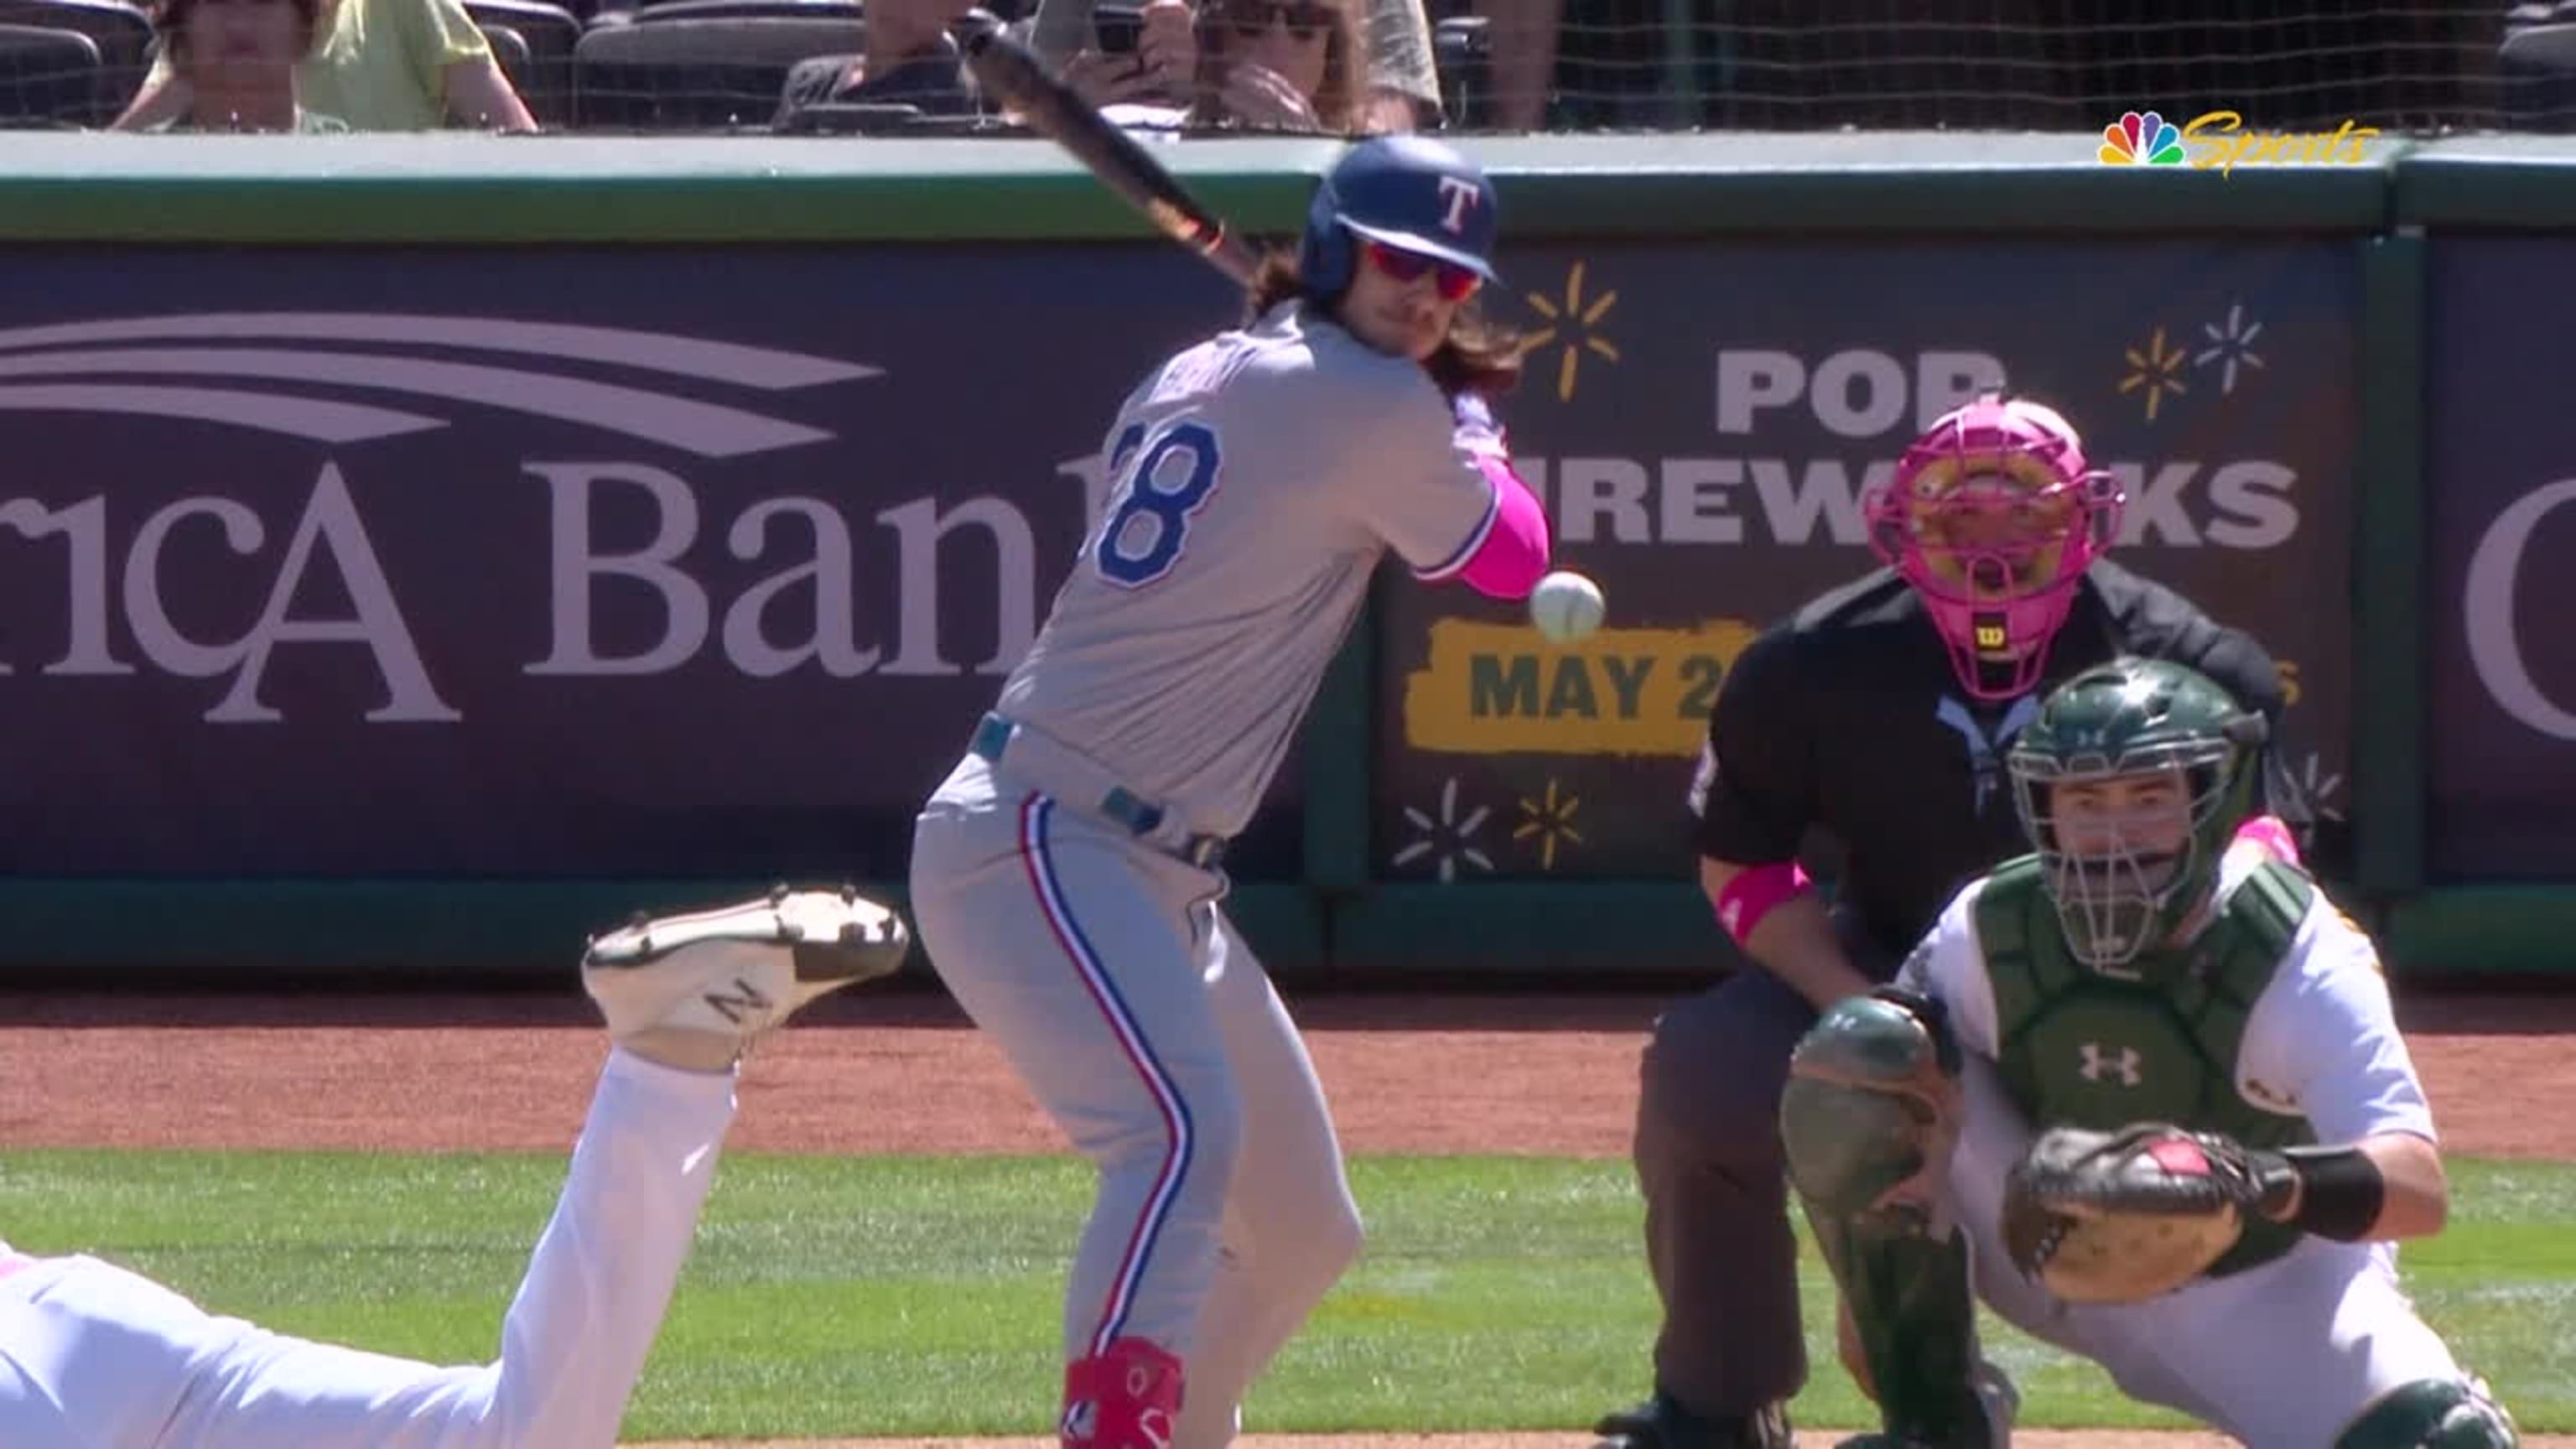 Adolis García opens up the scoring for the @rangers with a BLAST